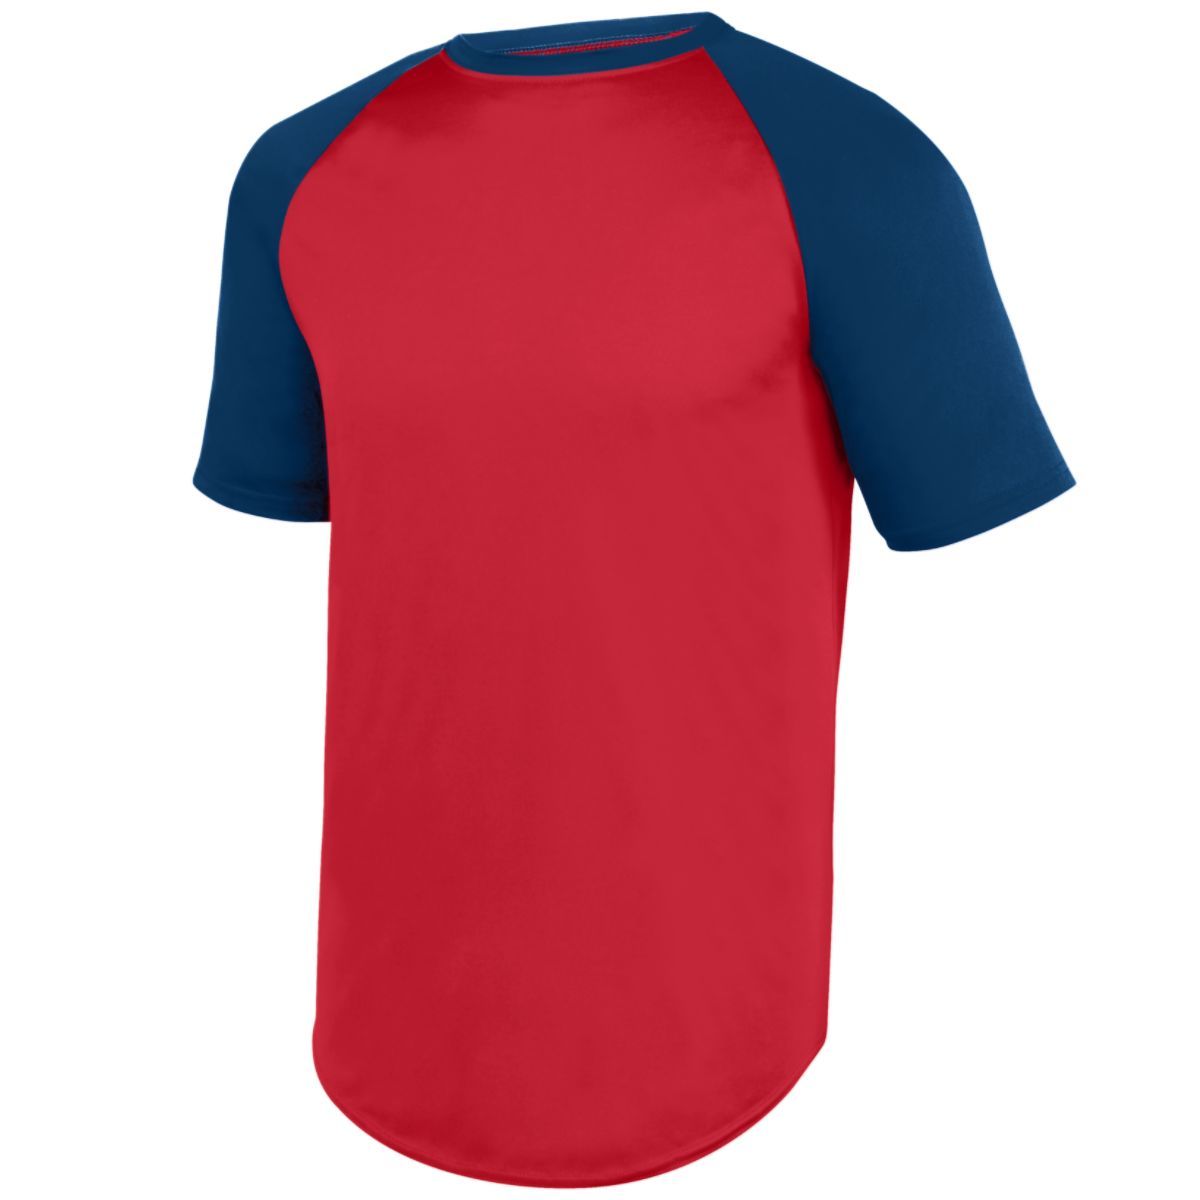 Augusta Sportswear Wicking Short Sleeve Baseball Jersey in Red/Navy  -Part of the Adult, Adult-Jersey, Augusta-Products, Baseball, Shirts, All-Sports, All-Sports-1 product lines at KanaleyCreations.com